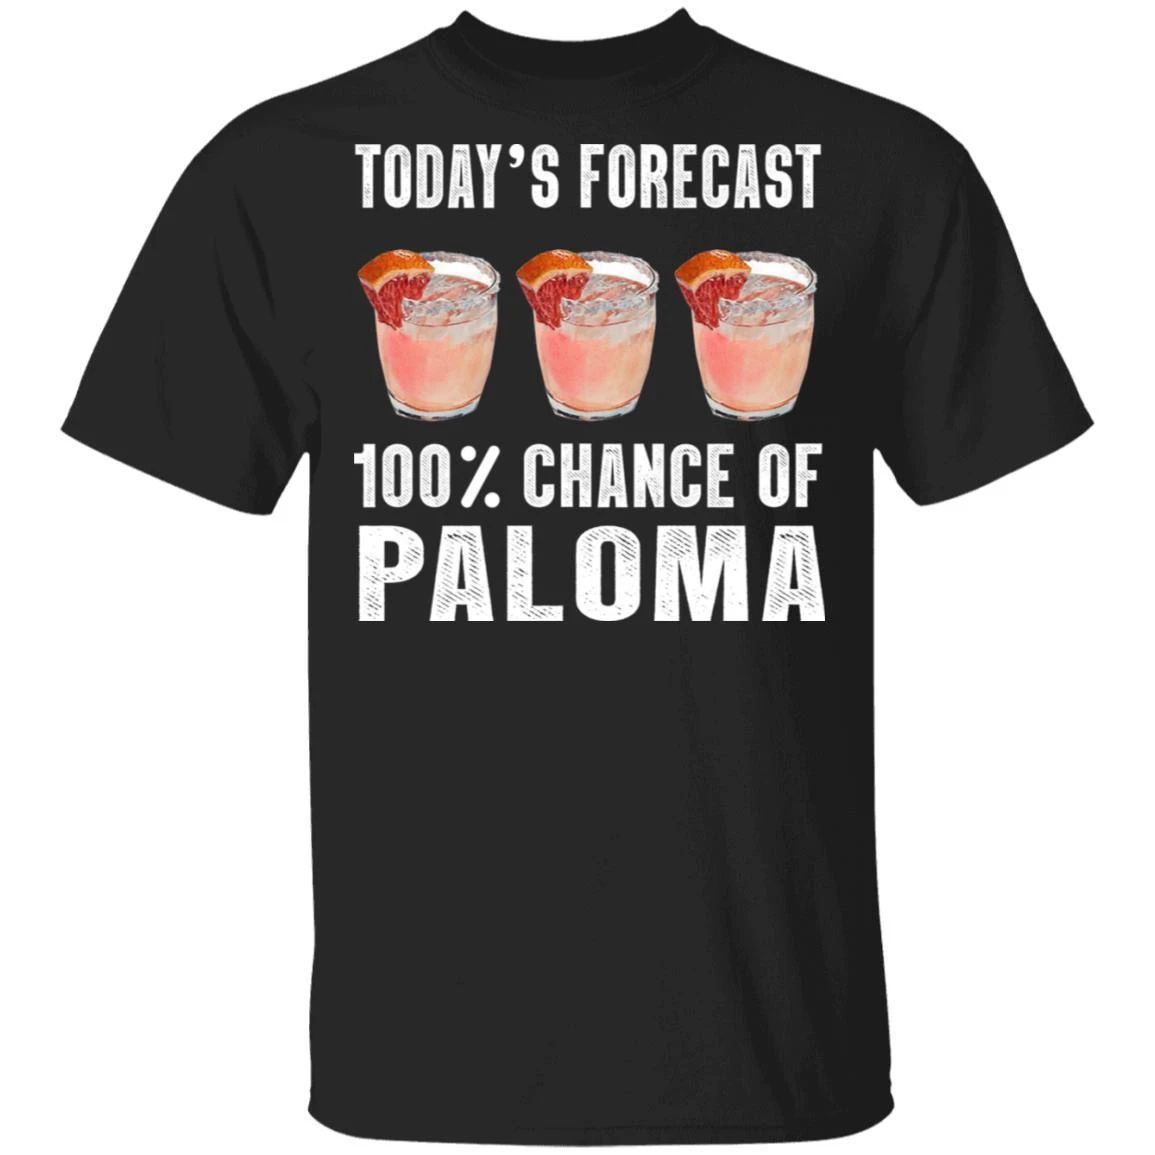 Today’s Forecast 100% Paloma T-shirt Cocktail Tee